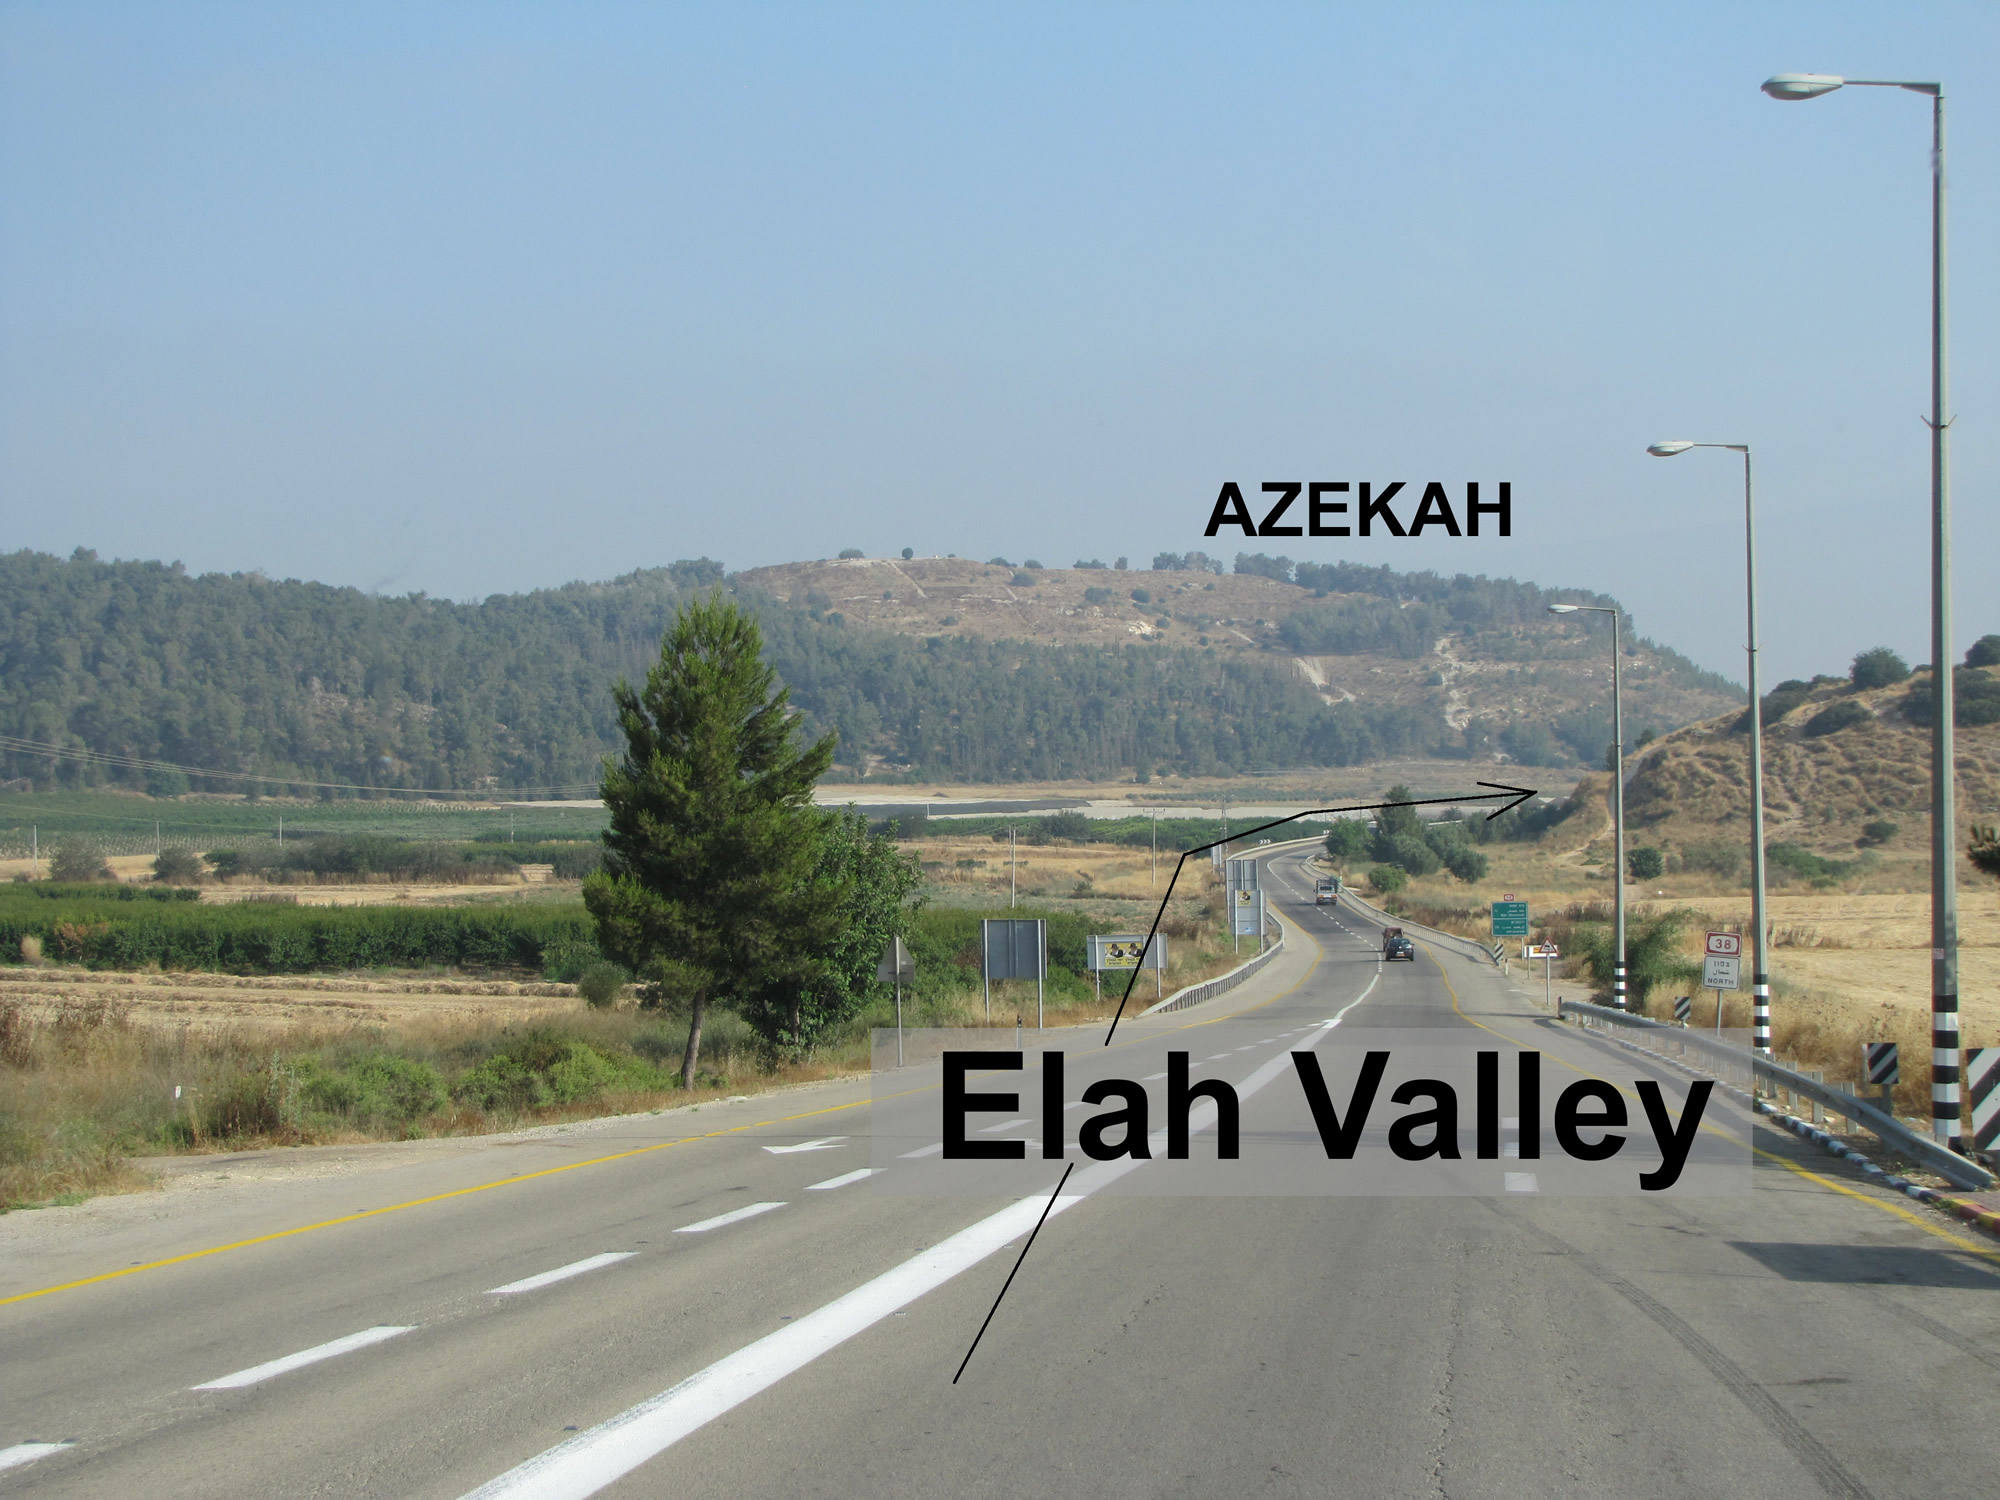 Azekah and Valley of Elah from a distance